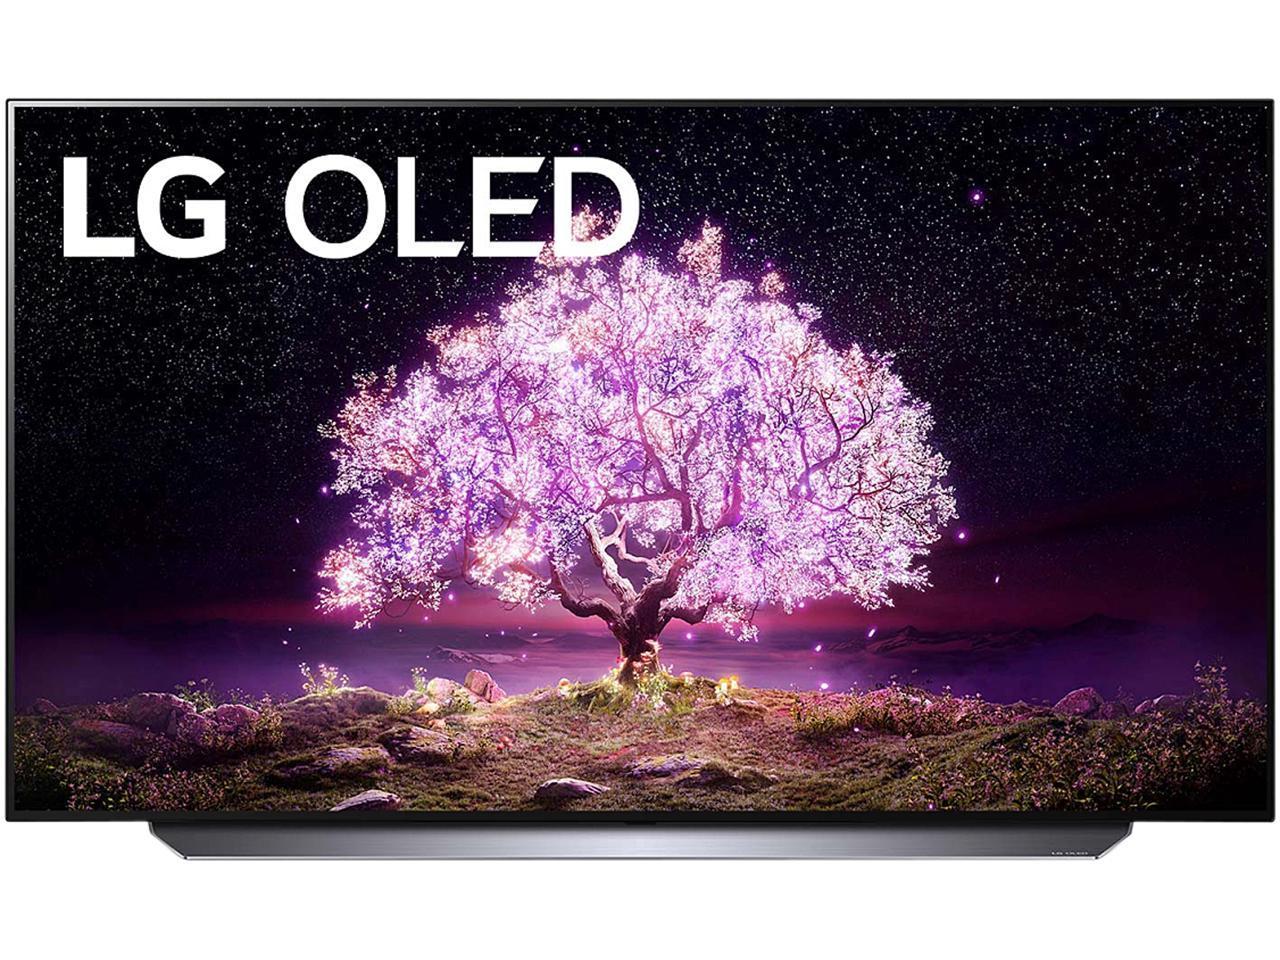 65in LG 4K Smart OLED TV with $150 Visa Gift Card for $1796.99 Shipped